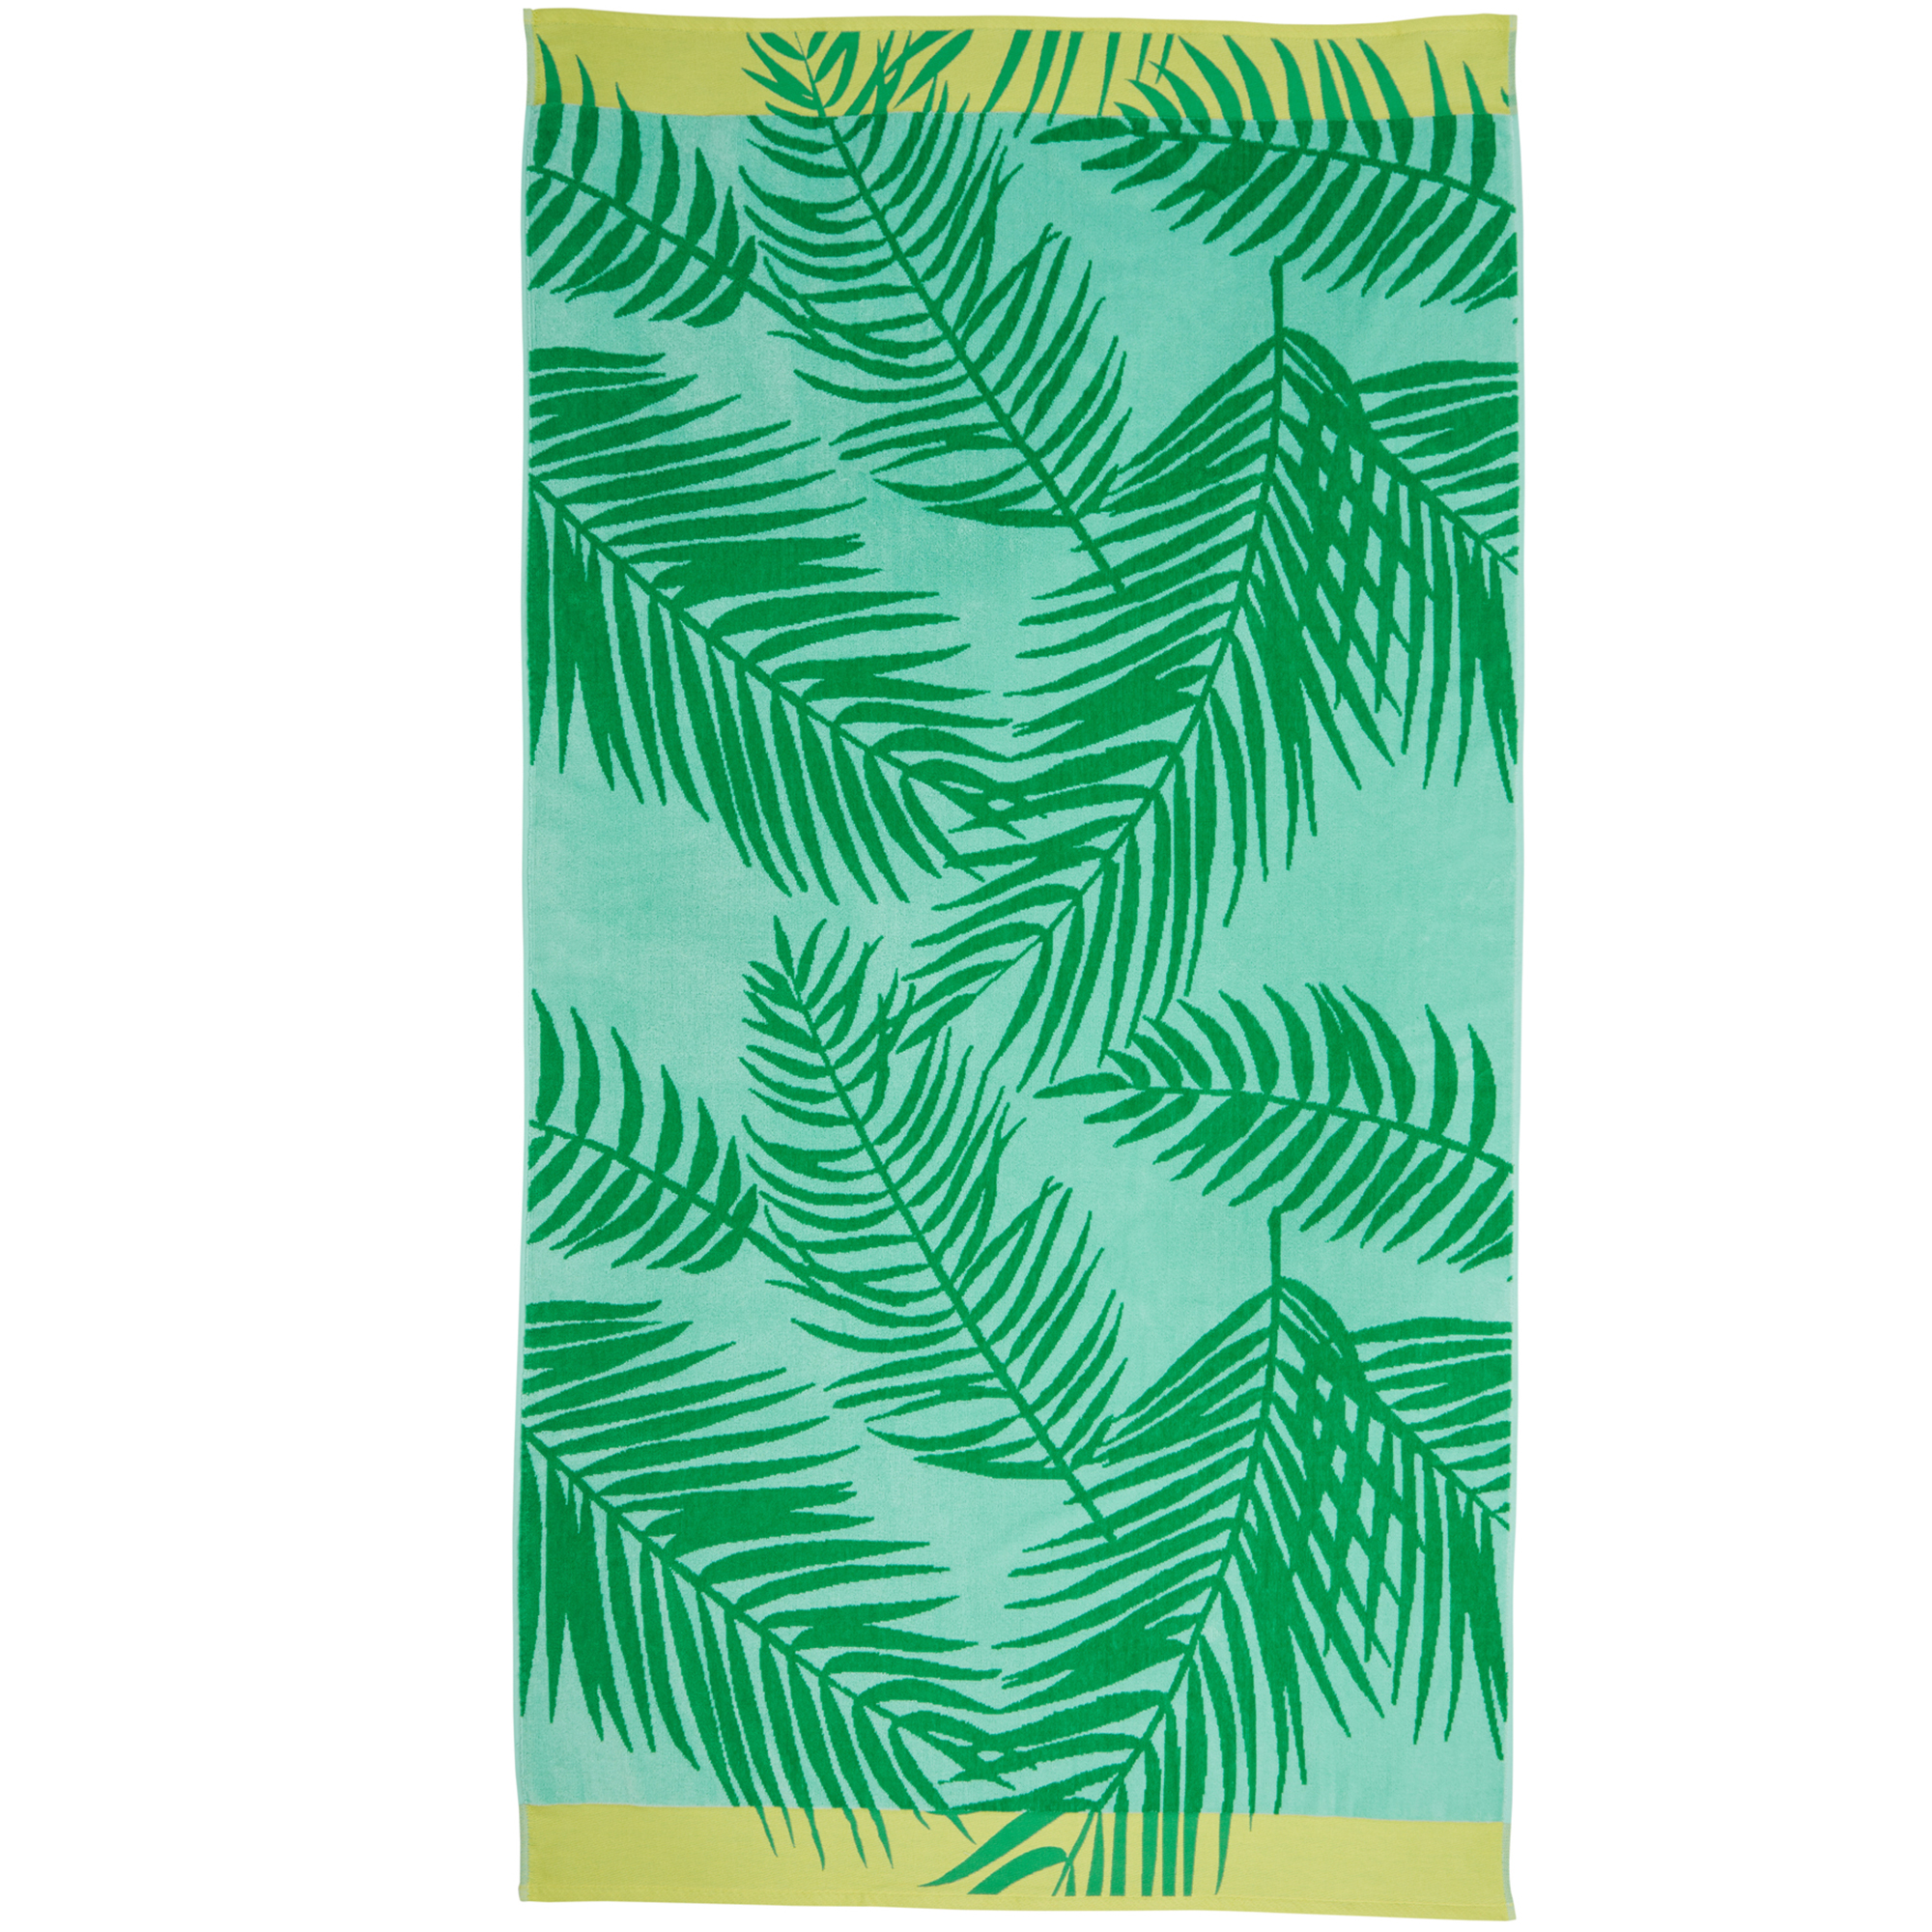 Green Surfing Beach Towel Temple Webster